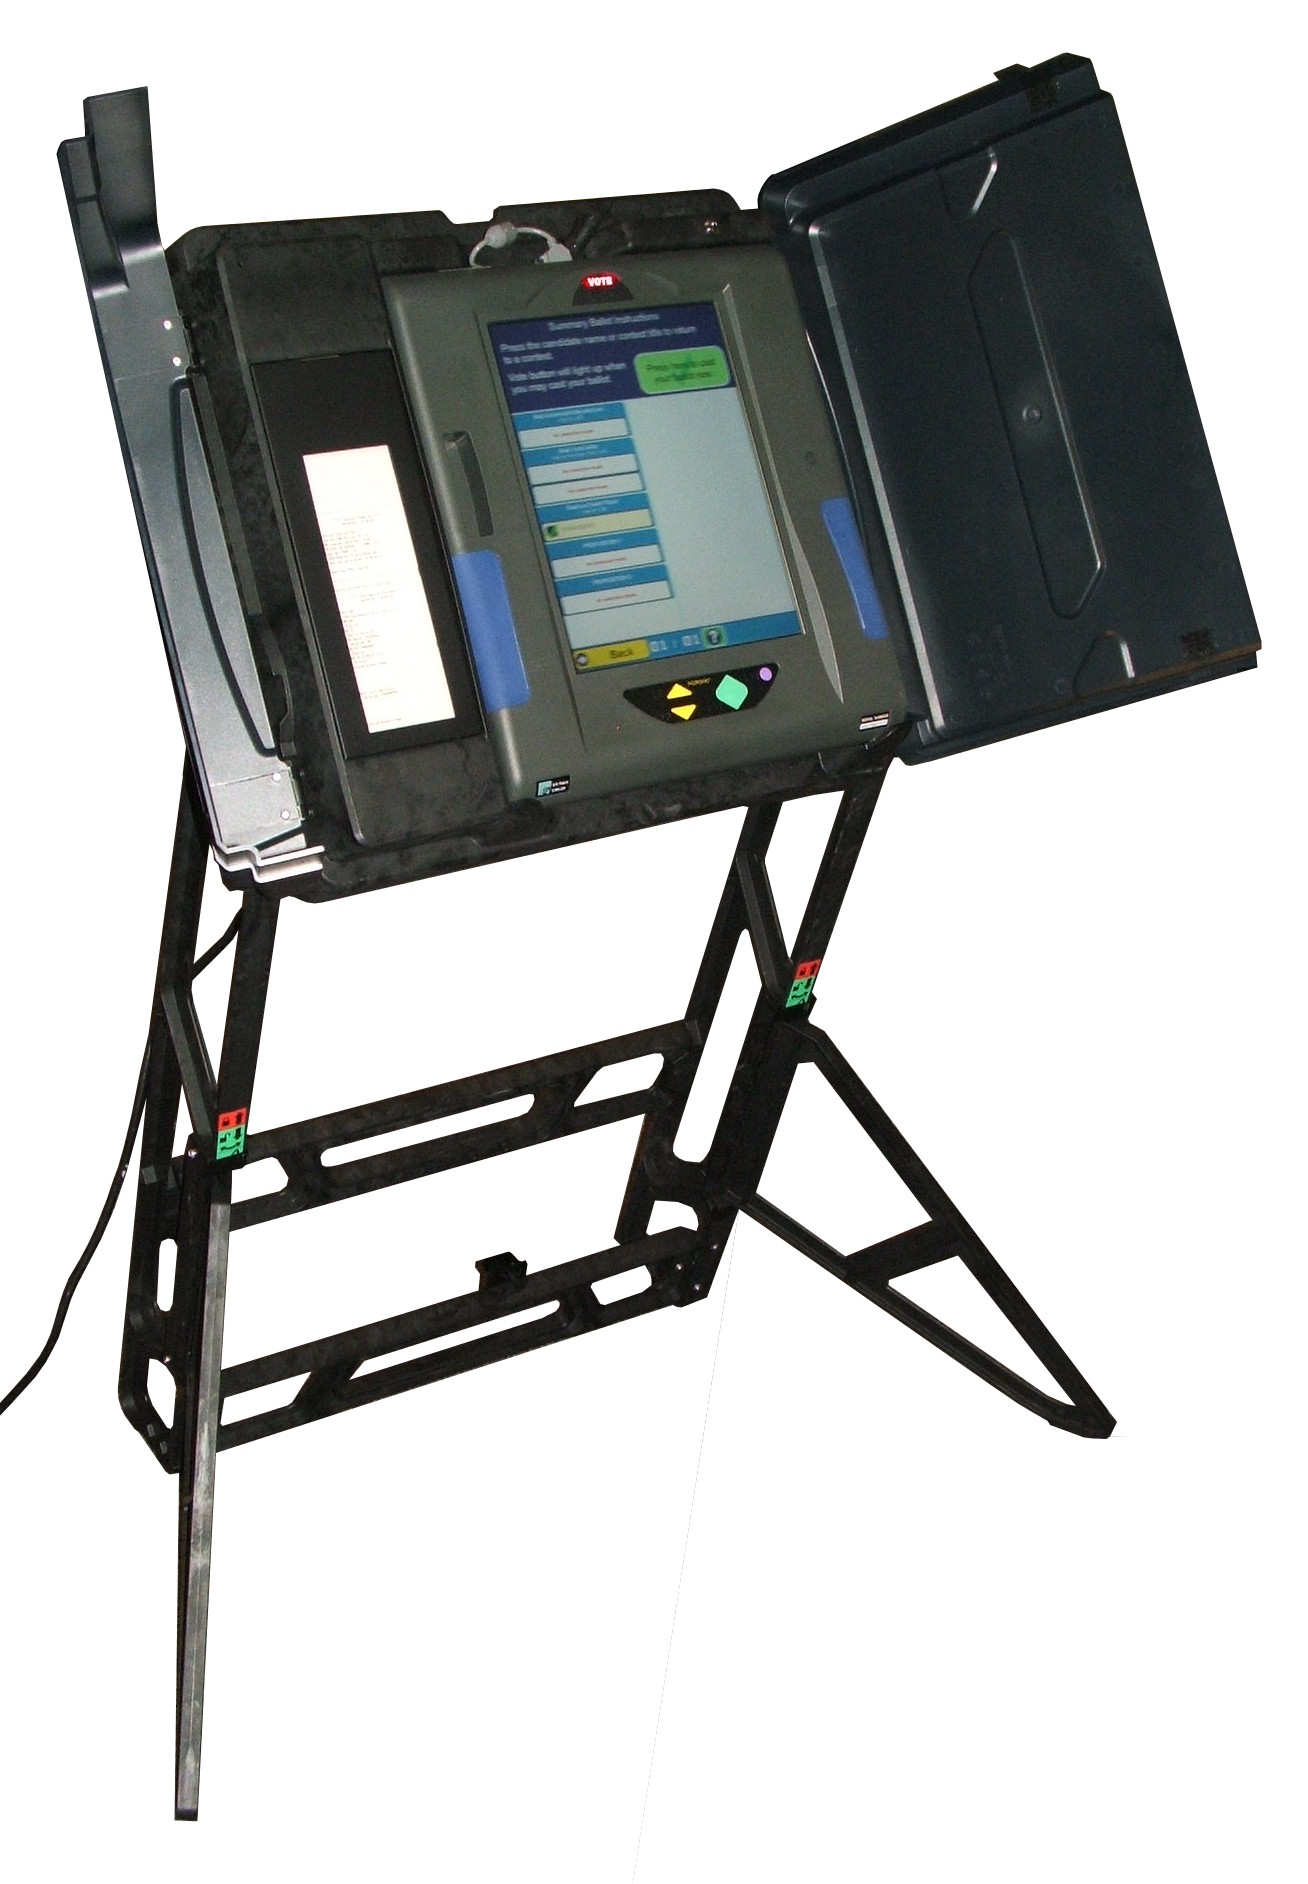 An iVotronic machine with paper receipt.